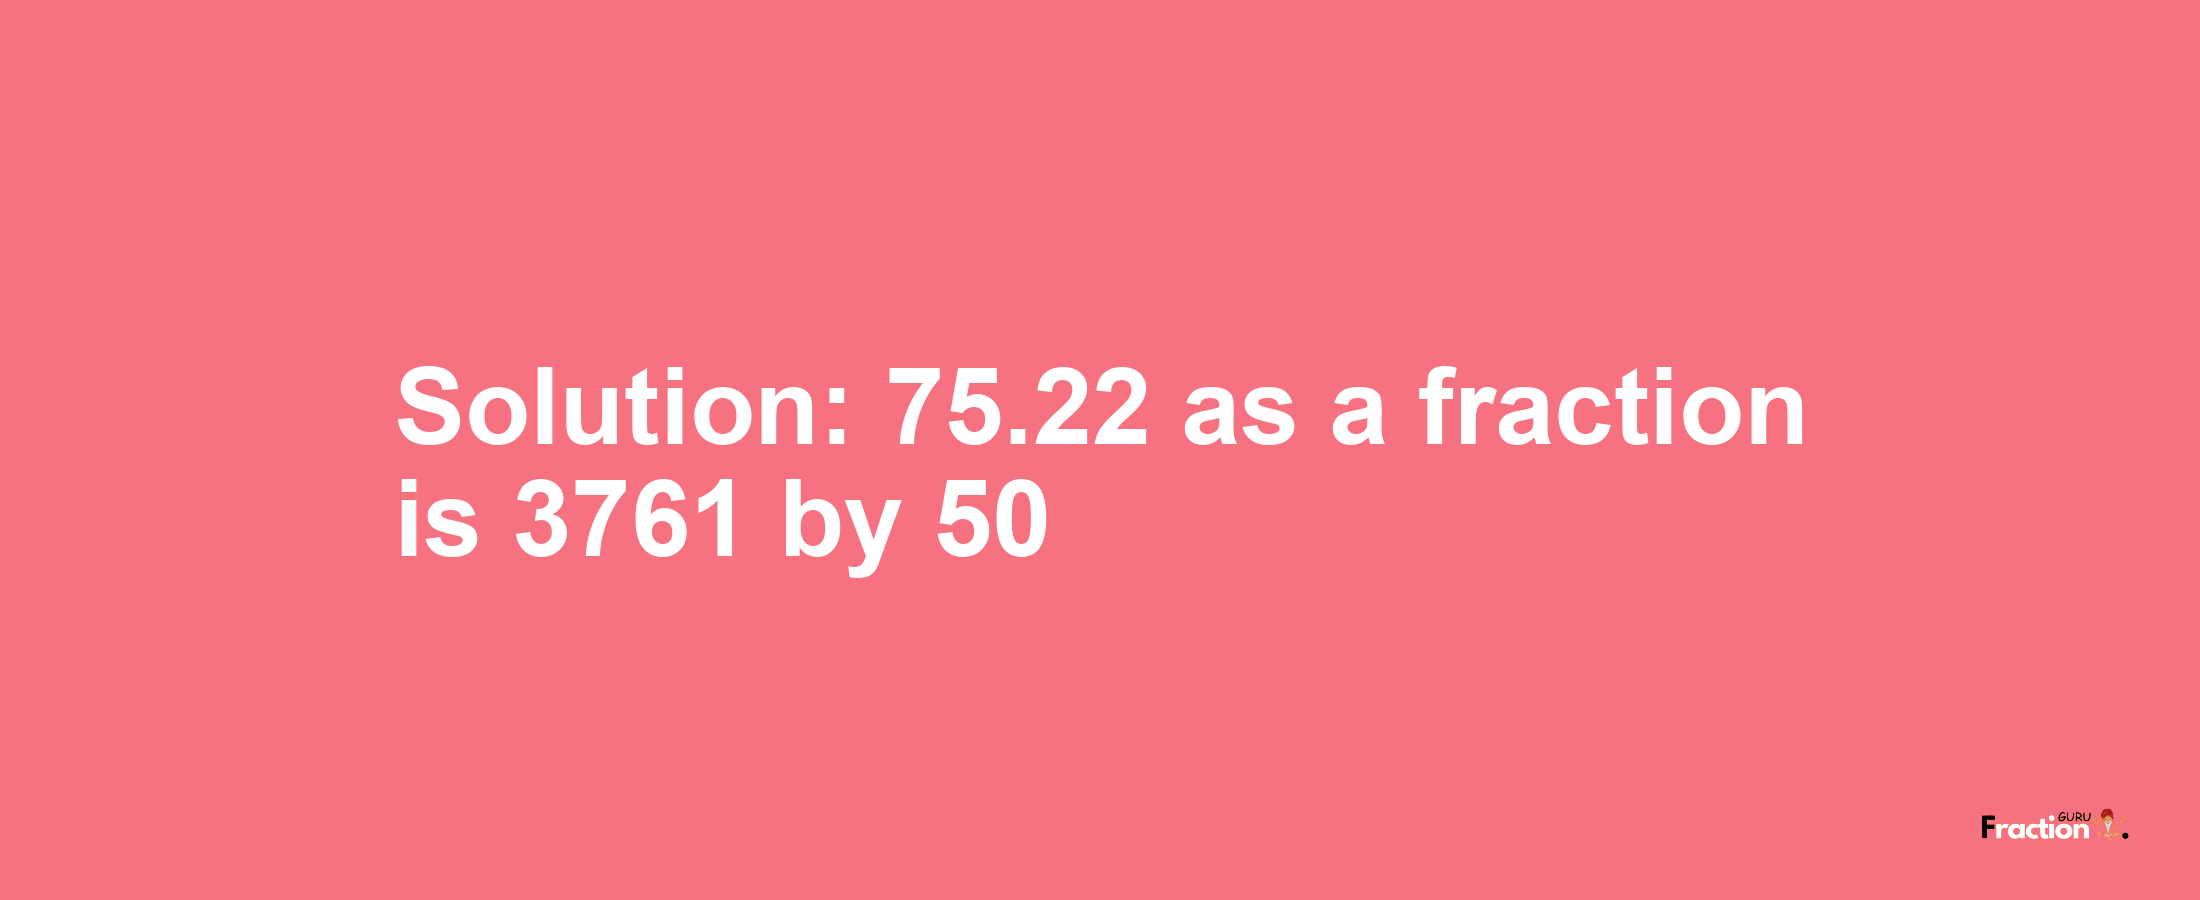 Solution:75.22 as a fraction is 3761/50